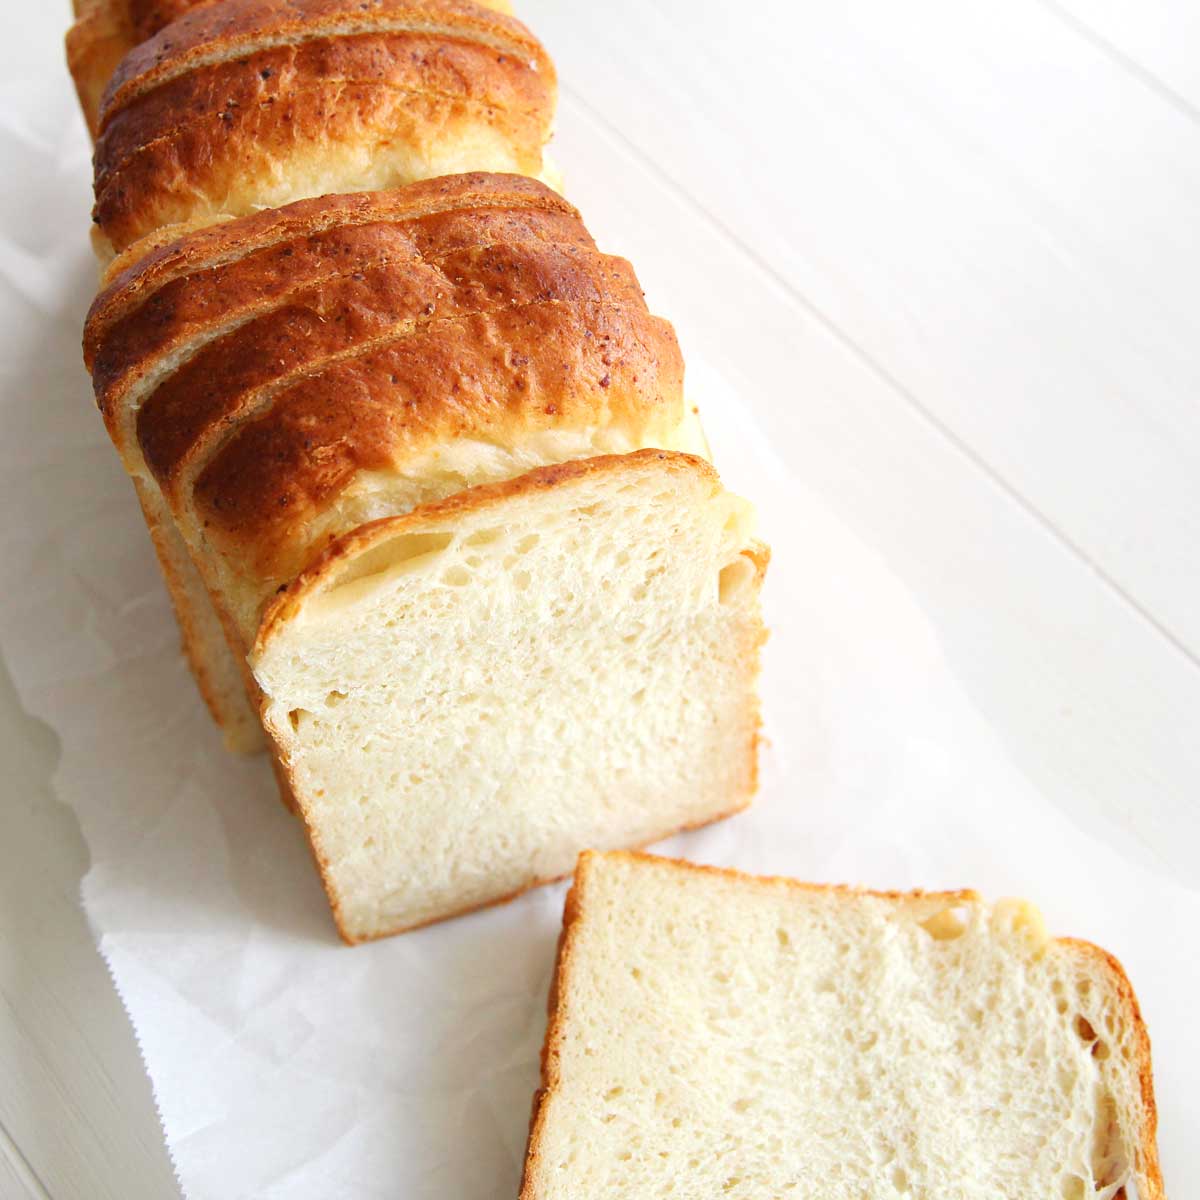 High Protein Cottage Cheese Yeast Bread (Easy Sandwich Bread Recipe) - Ricotta Cheese Yeast Bread